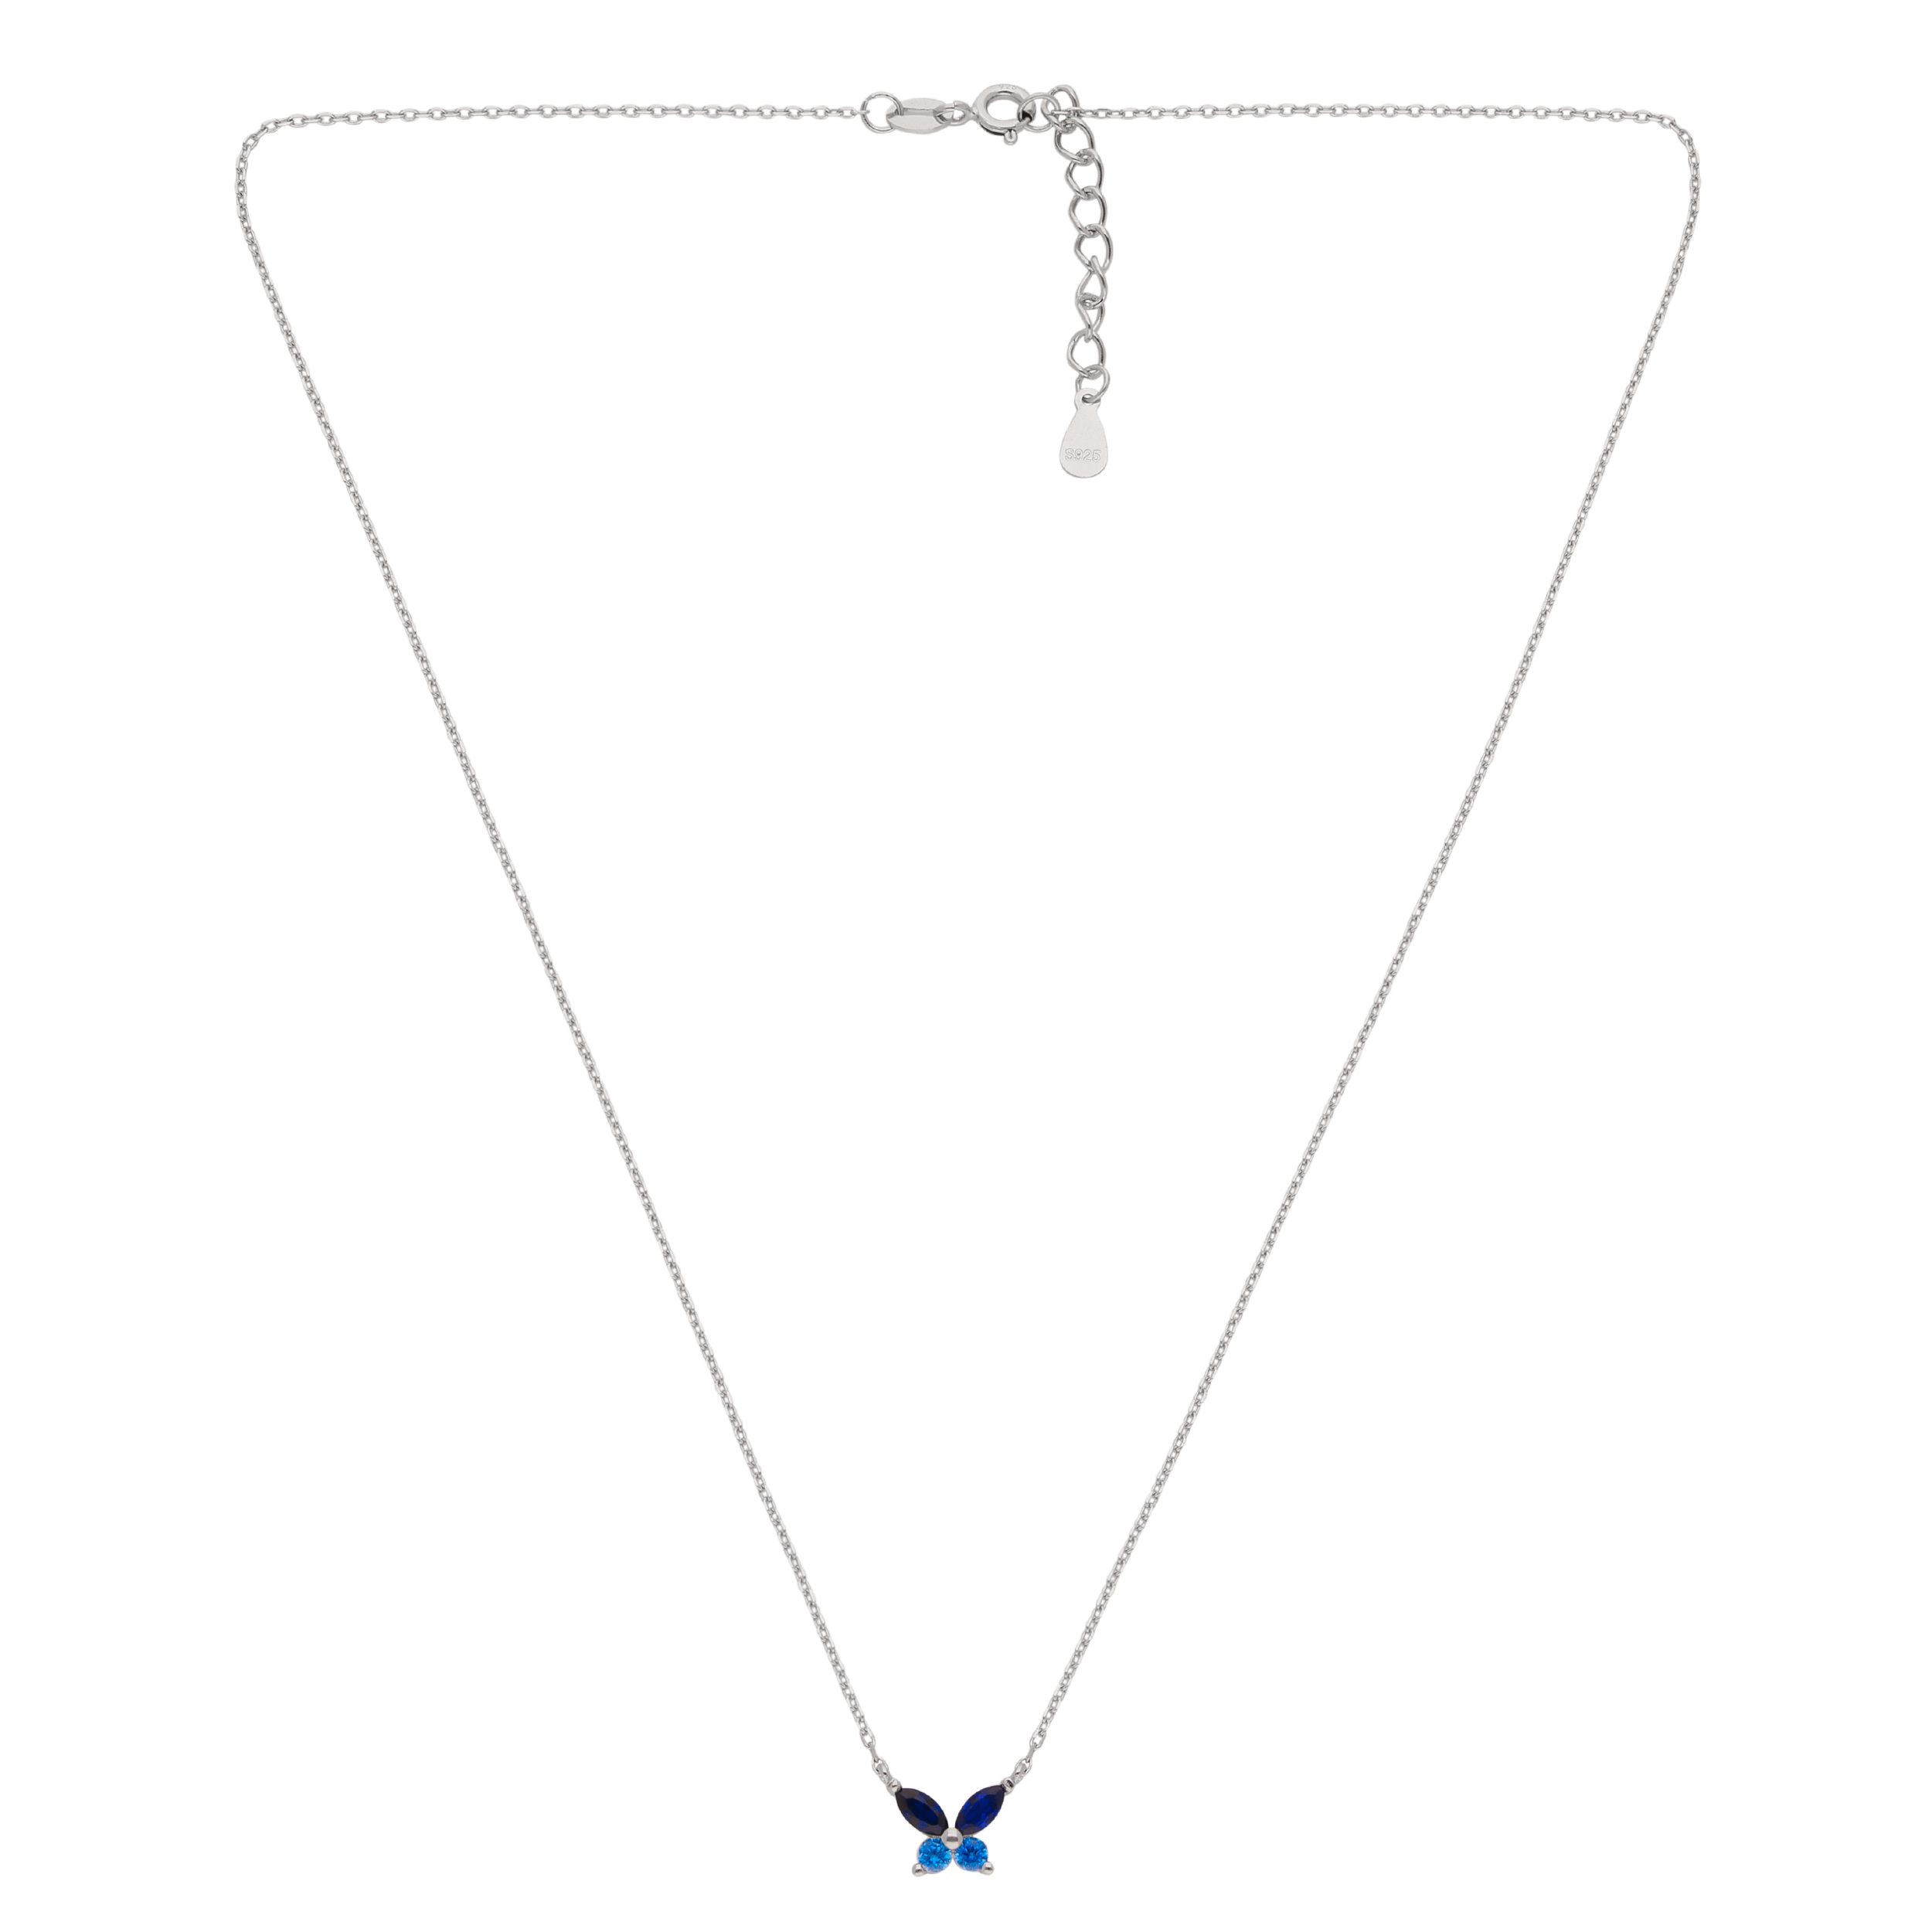 CRYSTAL BUTTERFLY CHAIN PENDANT | SKU:0018711066, 0018711073, 0018711035, 0018711042, 0018711059